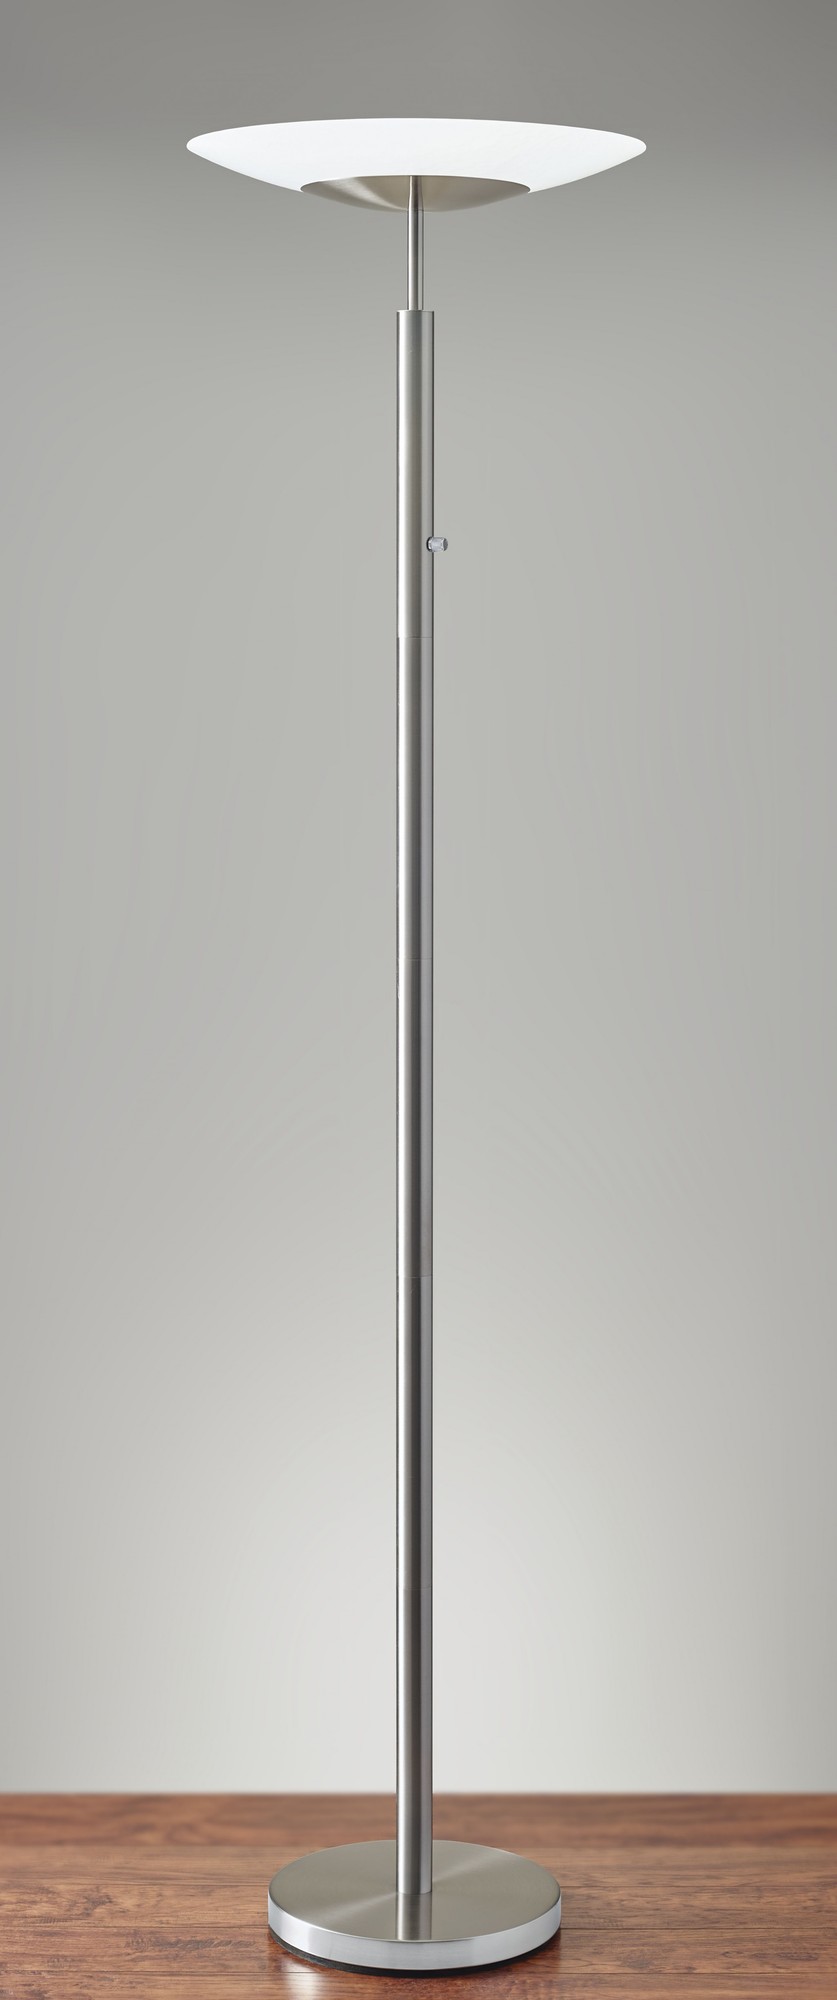 18" X 18" X 72" Brushed steel Metal LED Torchiere